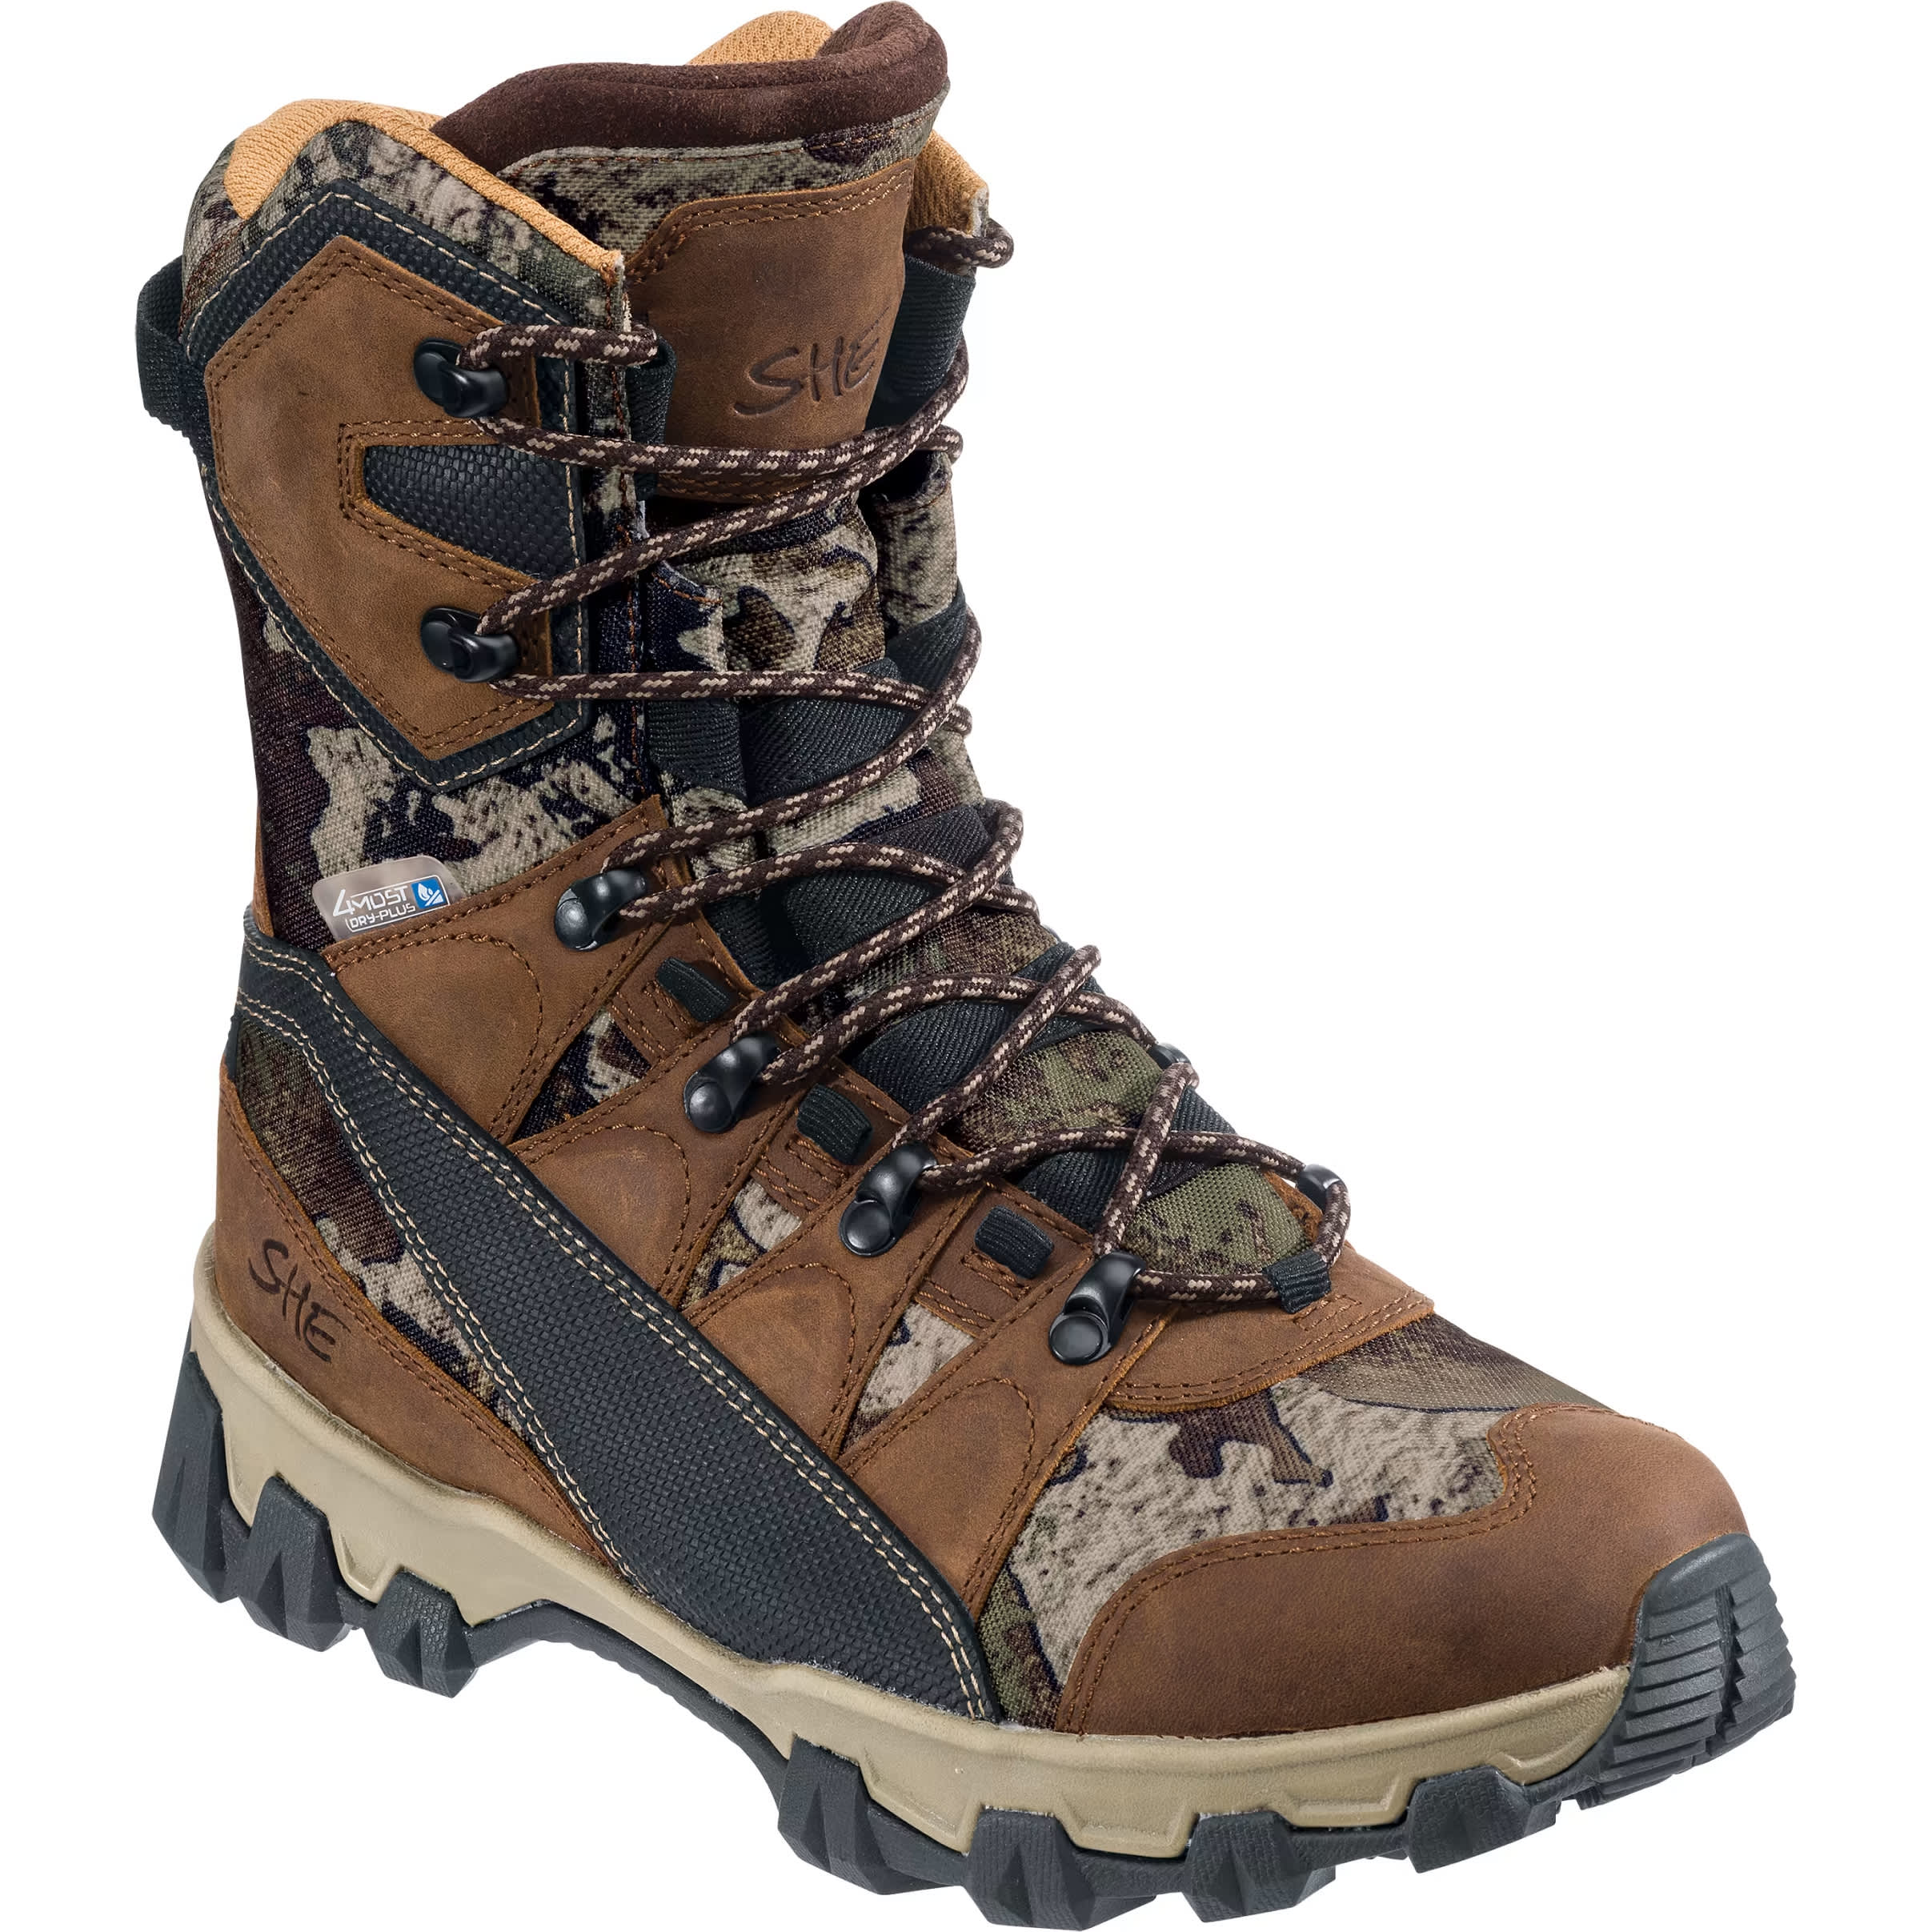 Keep your feet warm with boots from Cabela's - Cabela's